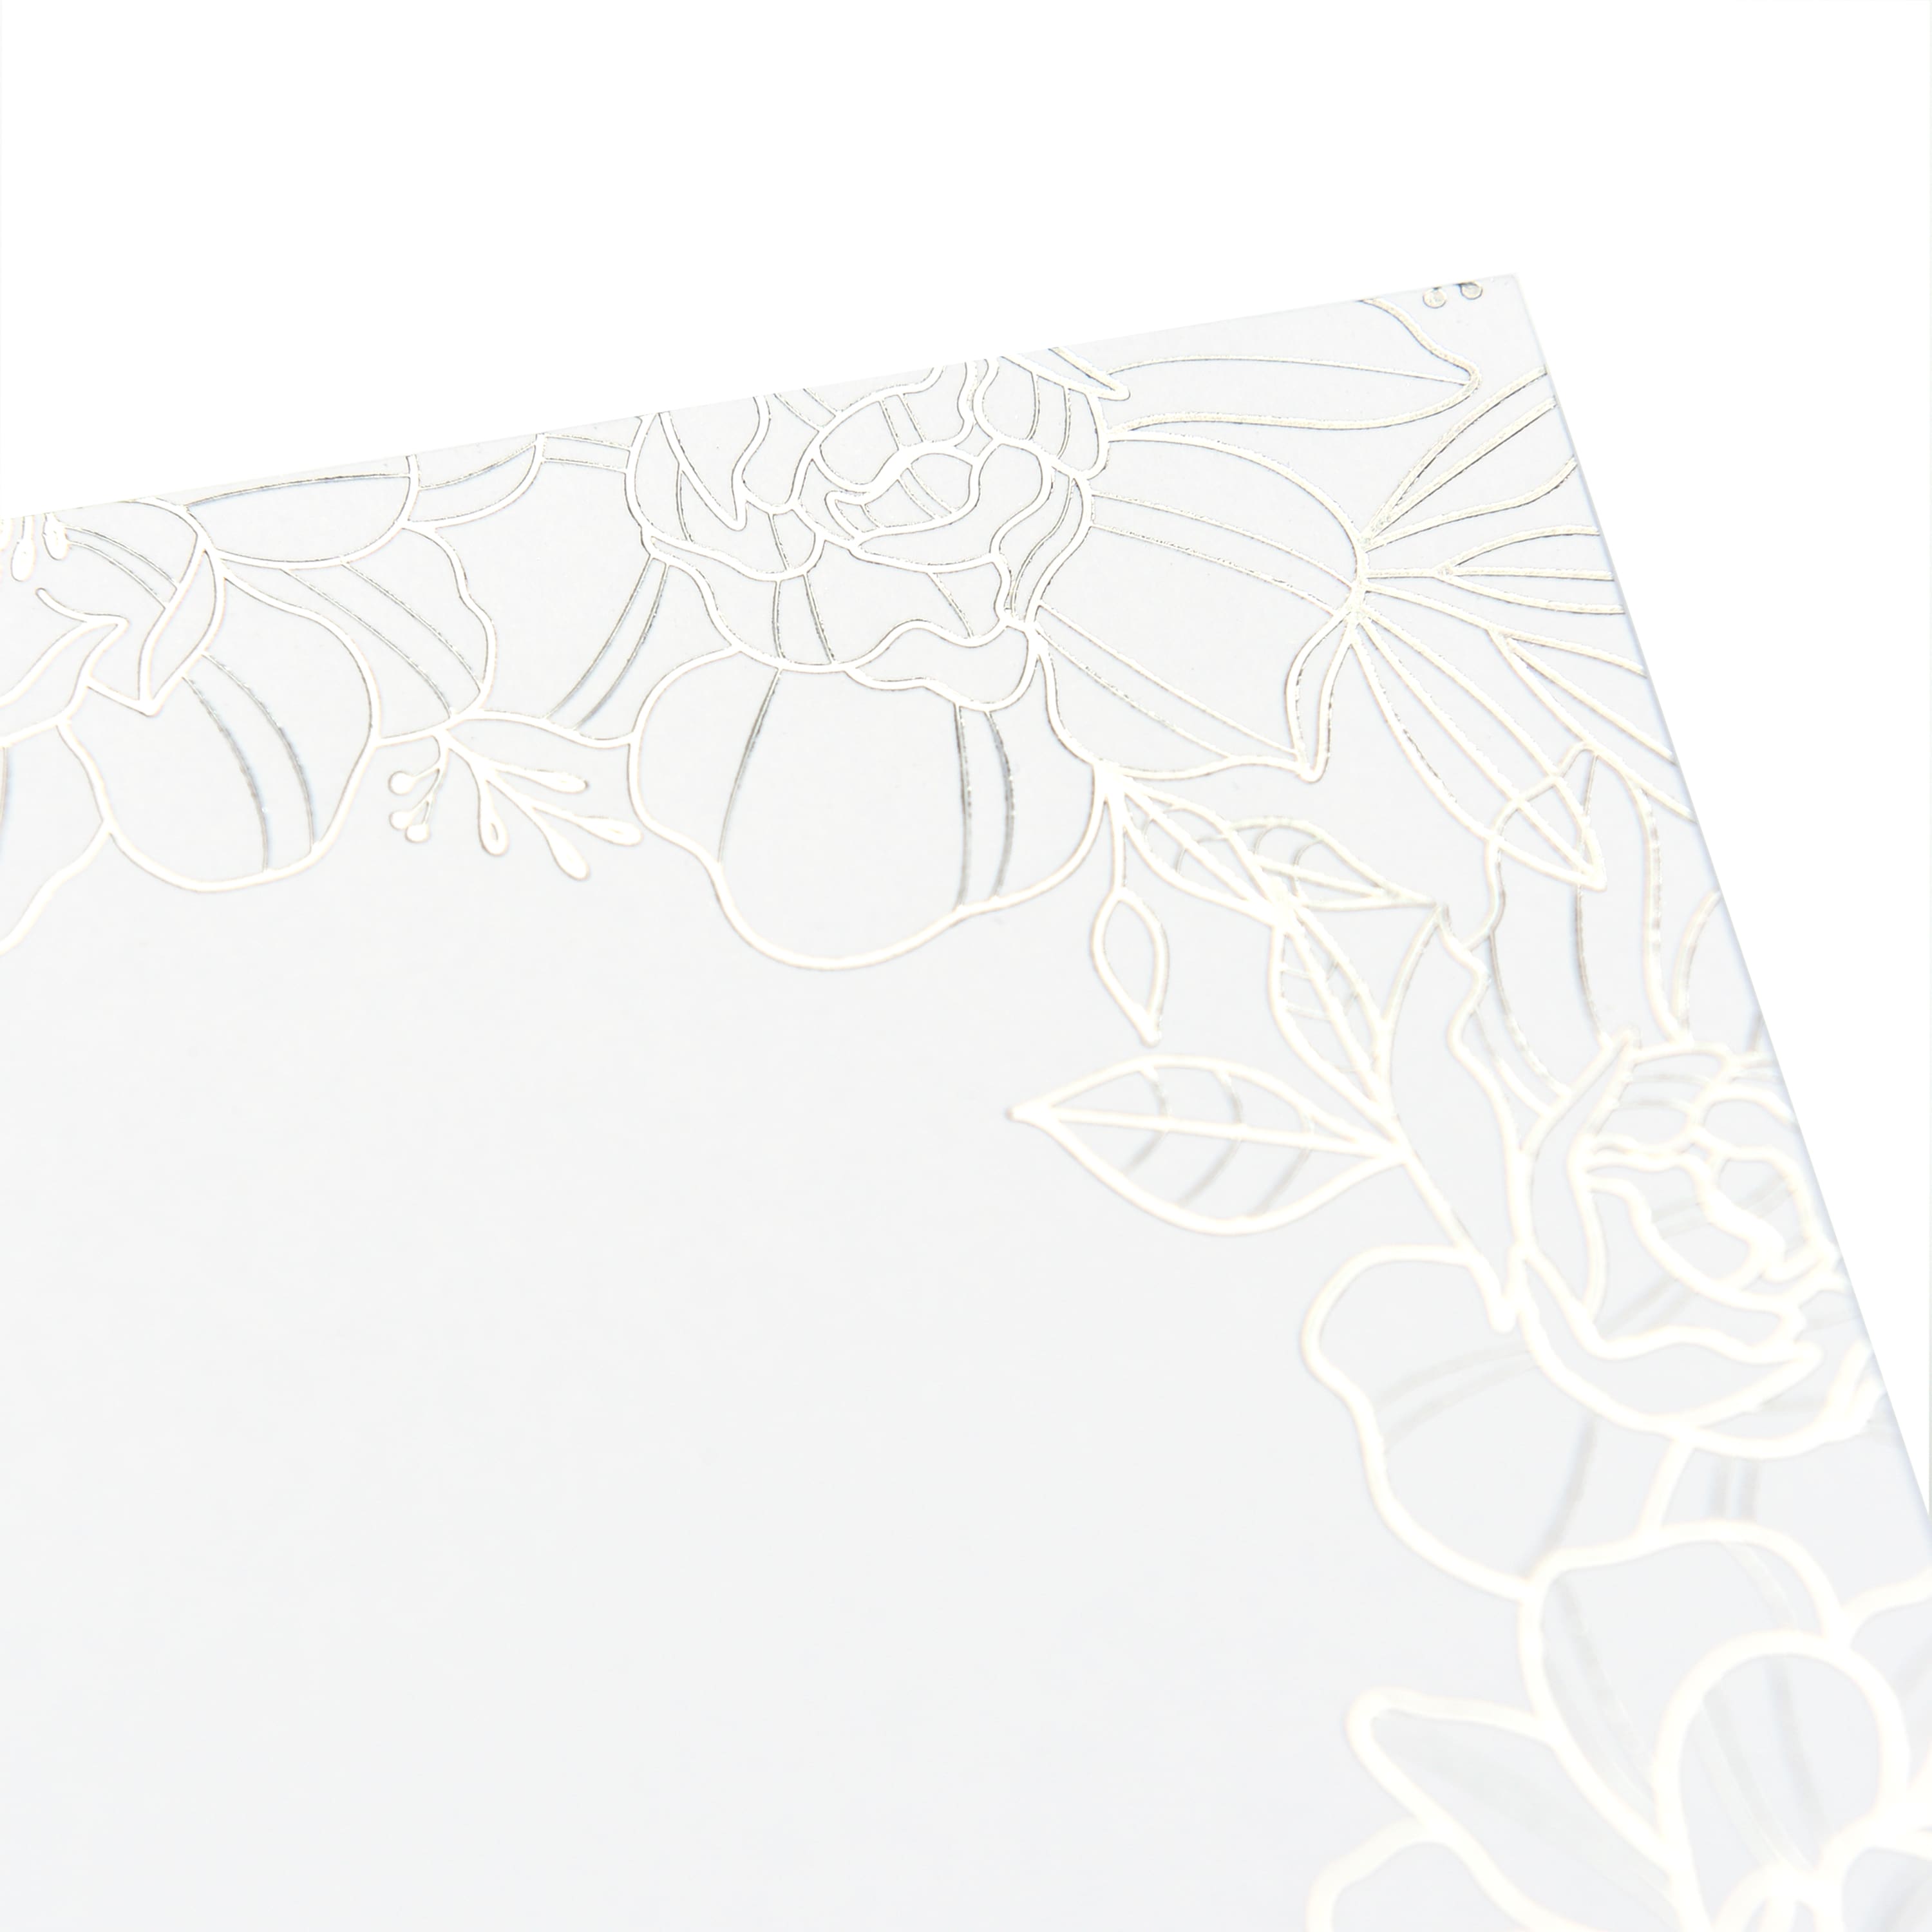 12 Packs: 10 ct. (120 total) 5&#x22; x 7&#x22; Floral Foil Invite Card Set by Recollections&#x2122;